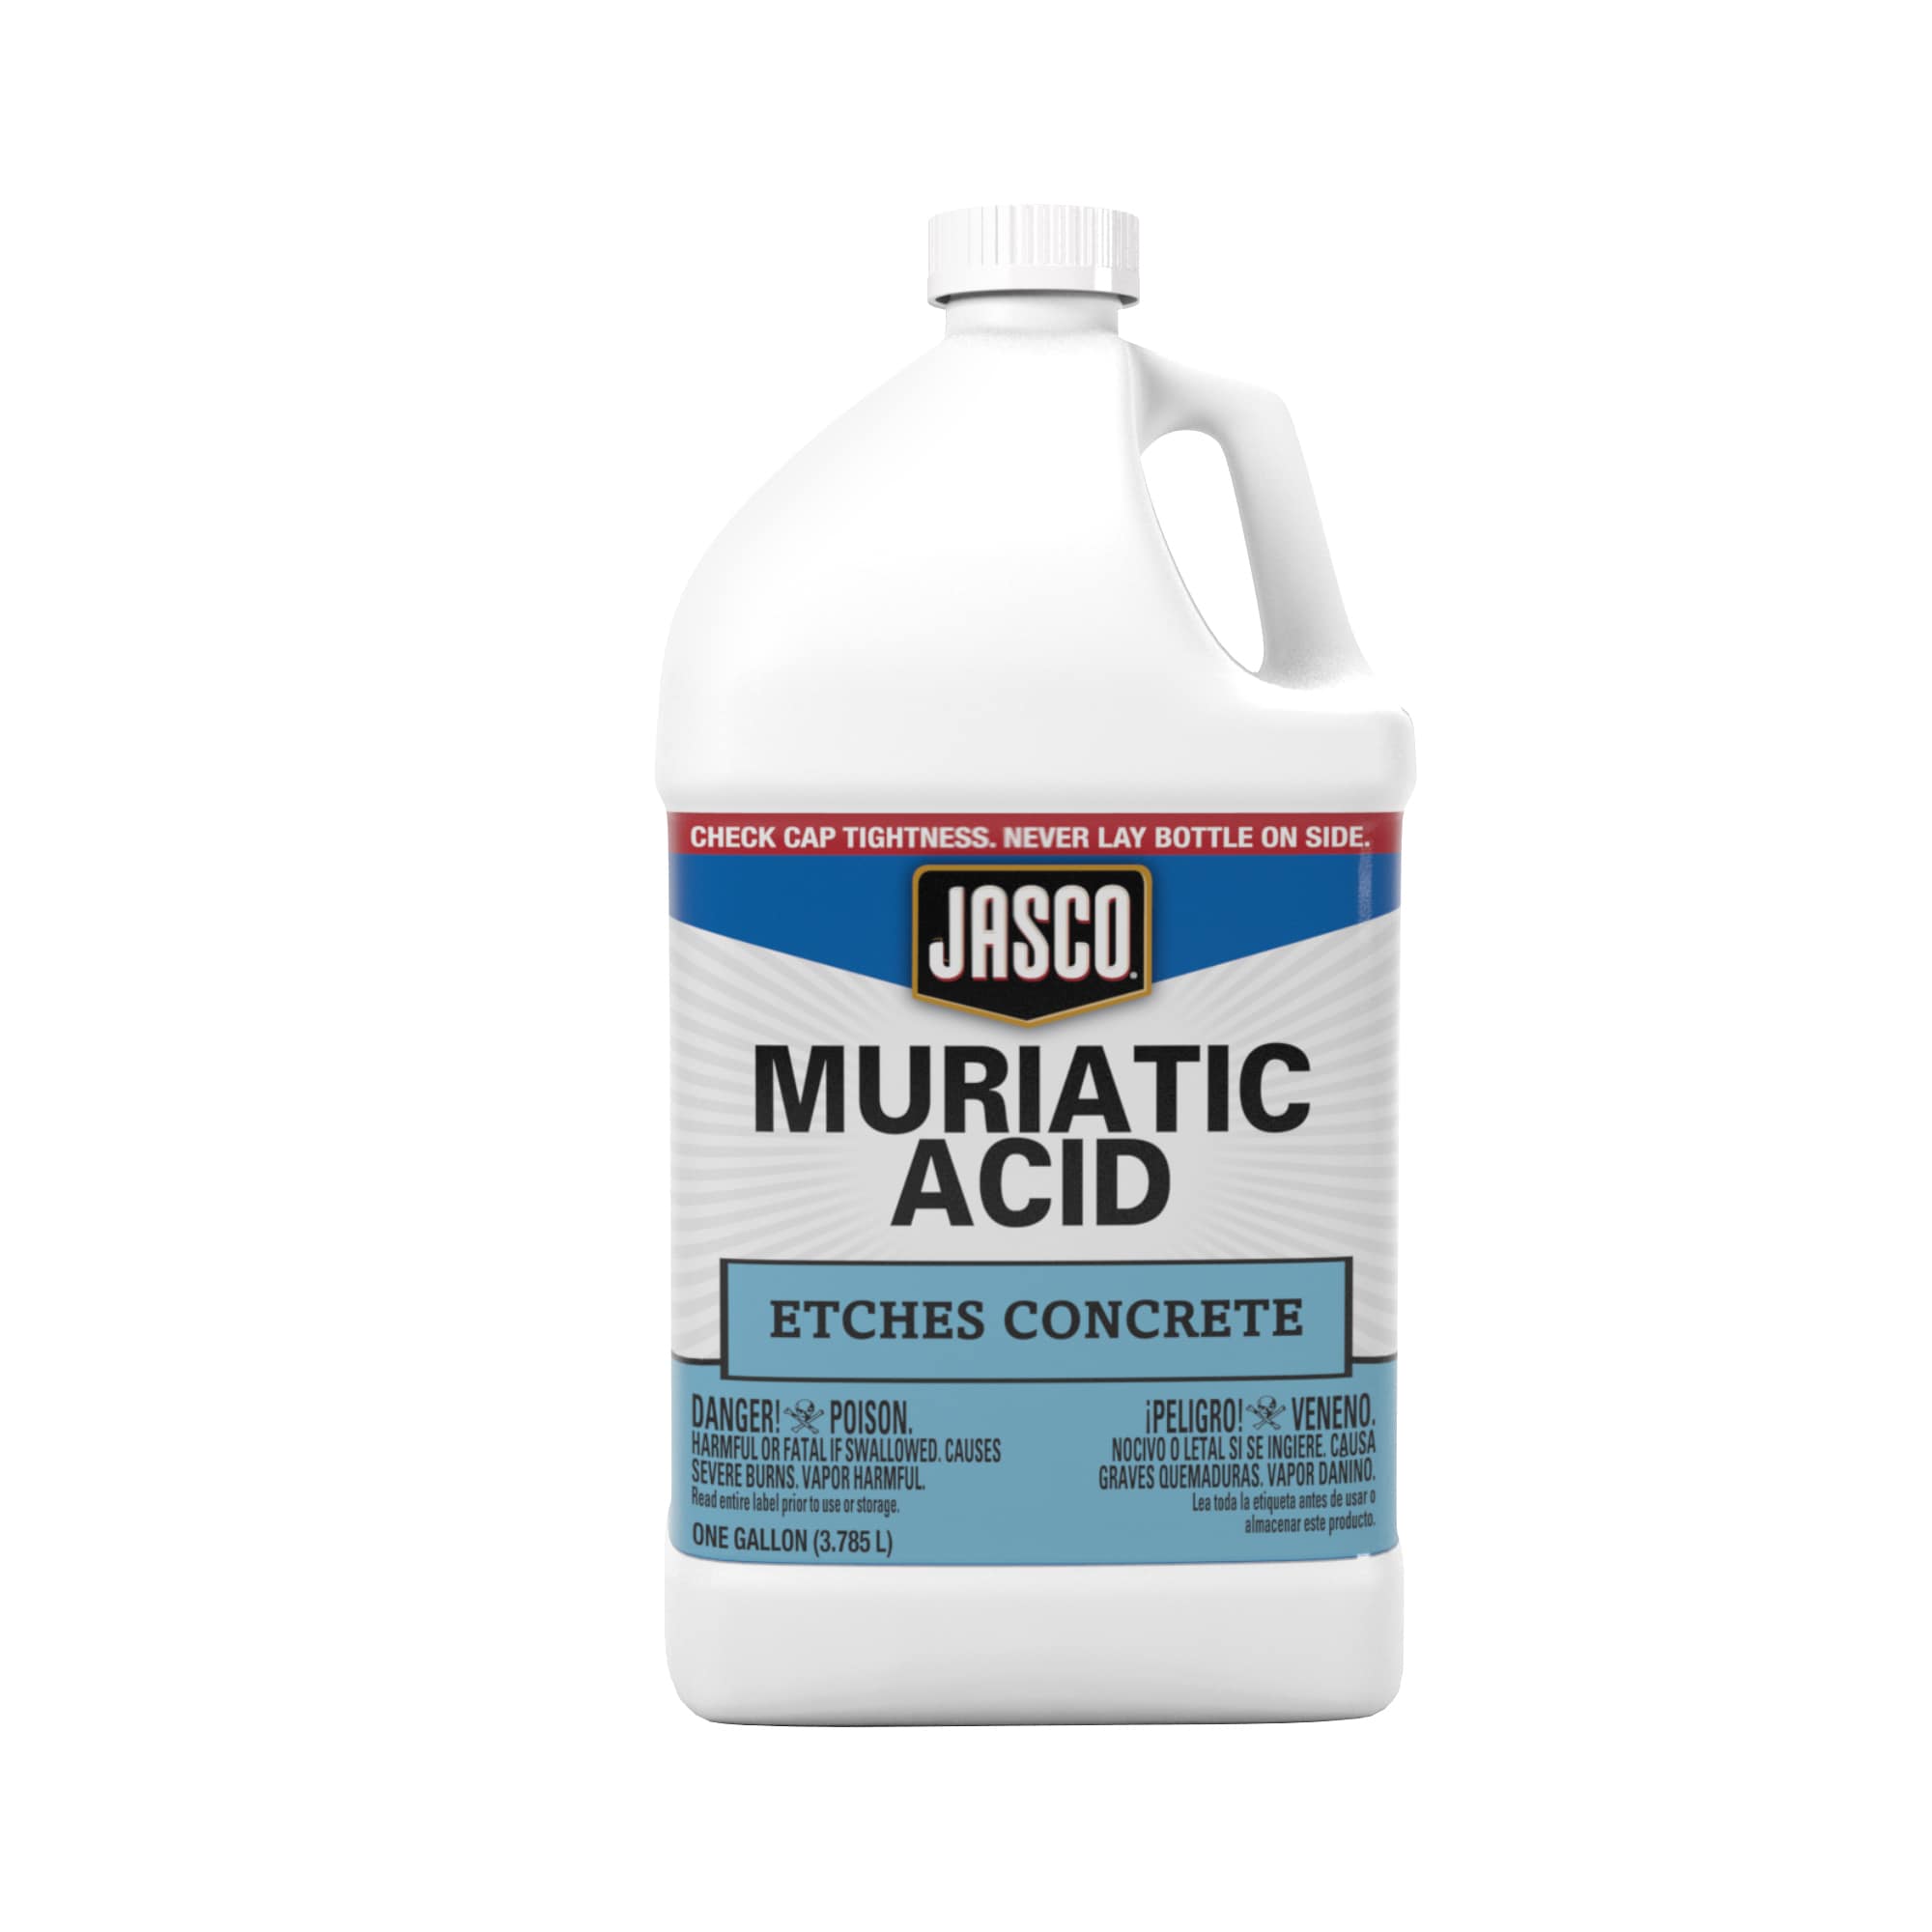 How to remove paint from concrete with muriatic acid